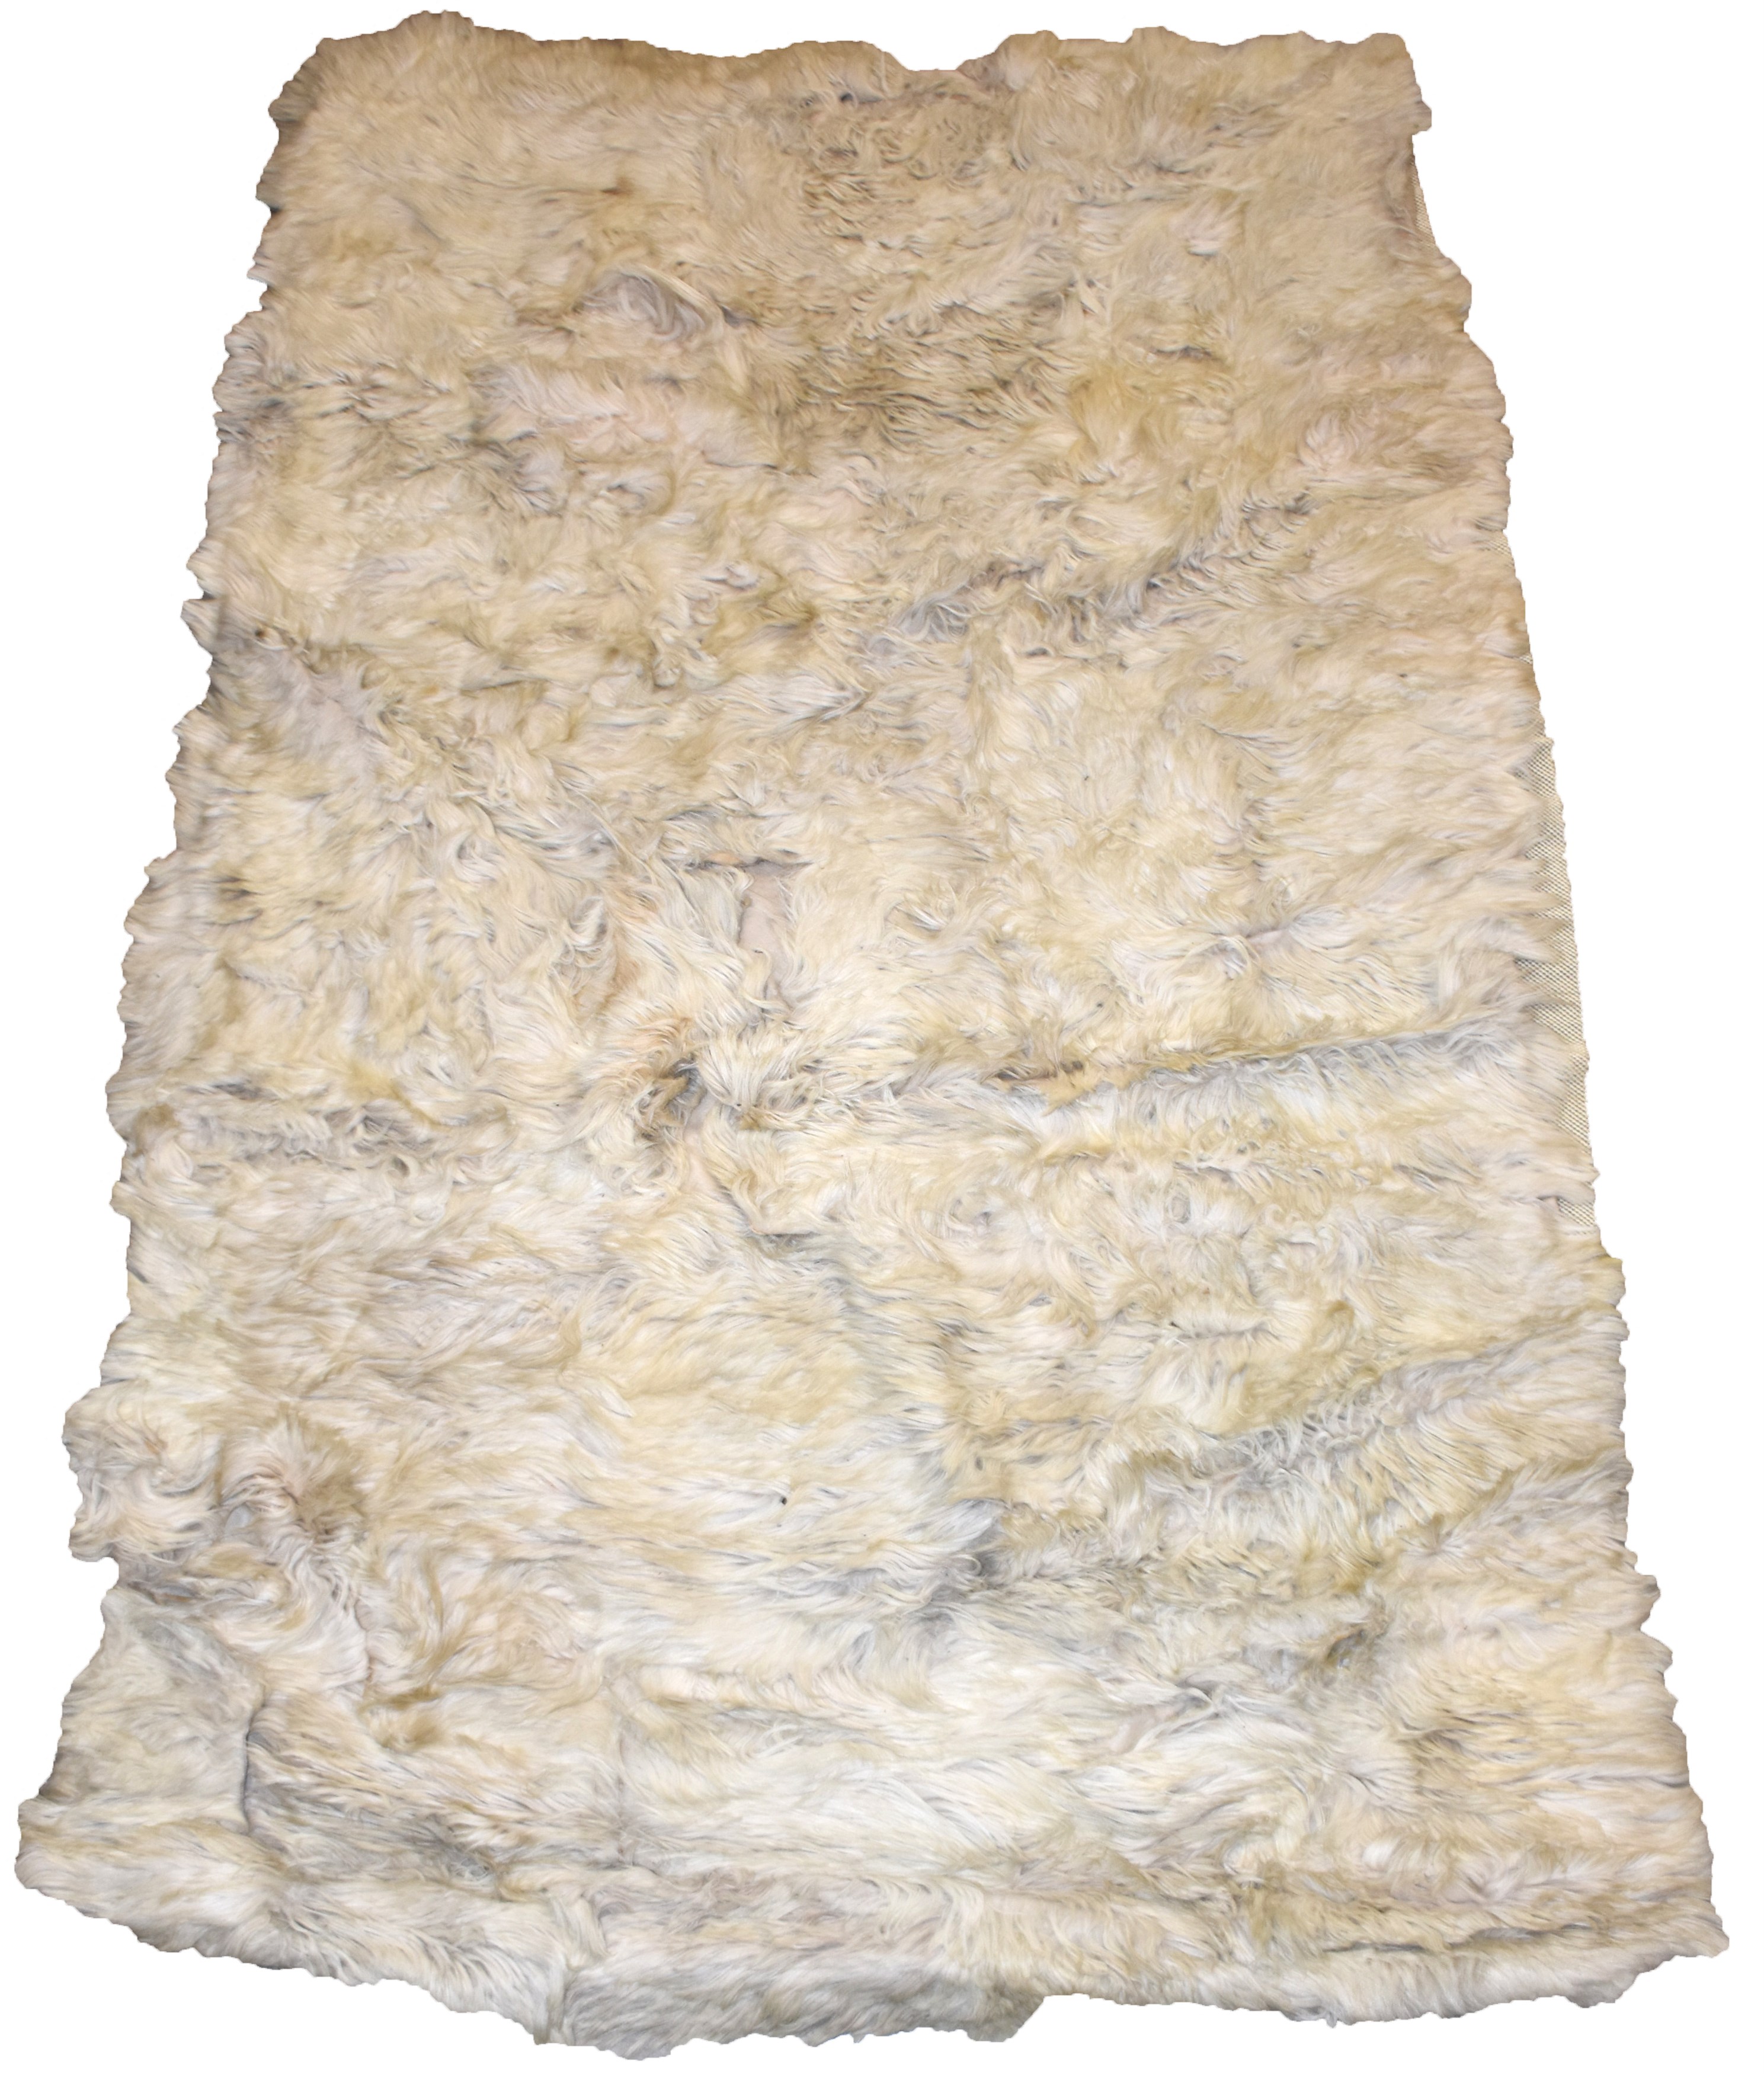 Rock And Pop Culture - Original Yak Hair Rug from the 49 Million Dollar Penthouse Magazine Mansion (photo evidence)